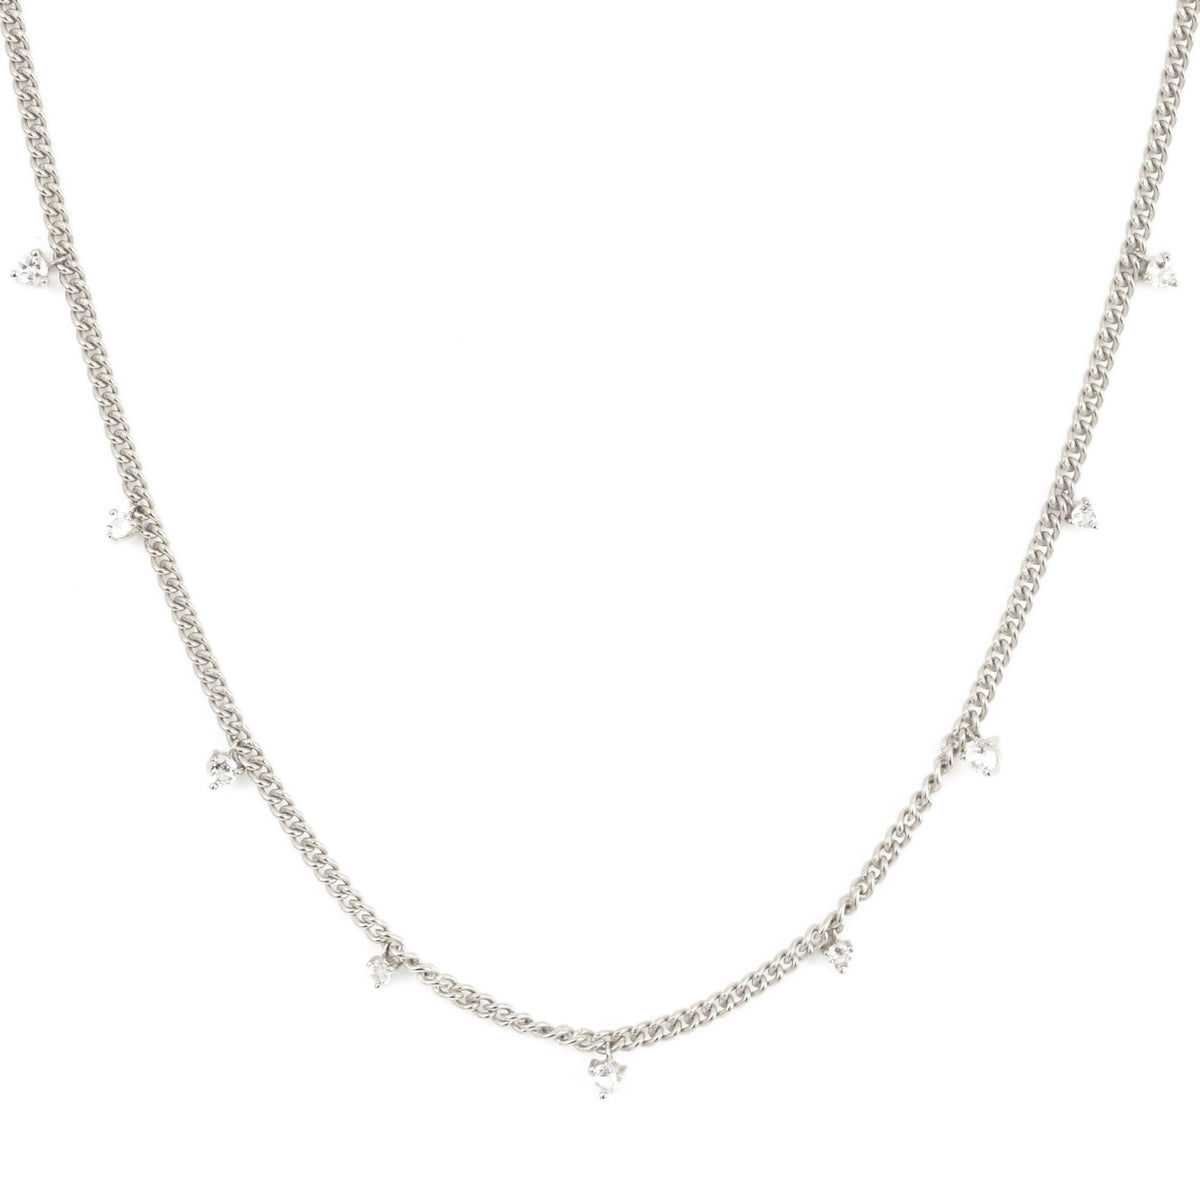 UNITY CROWN CURB LINK NECKLACE - WHITE TOPAZ &amp; SILVER - SO PRETTY CARA COTTER